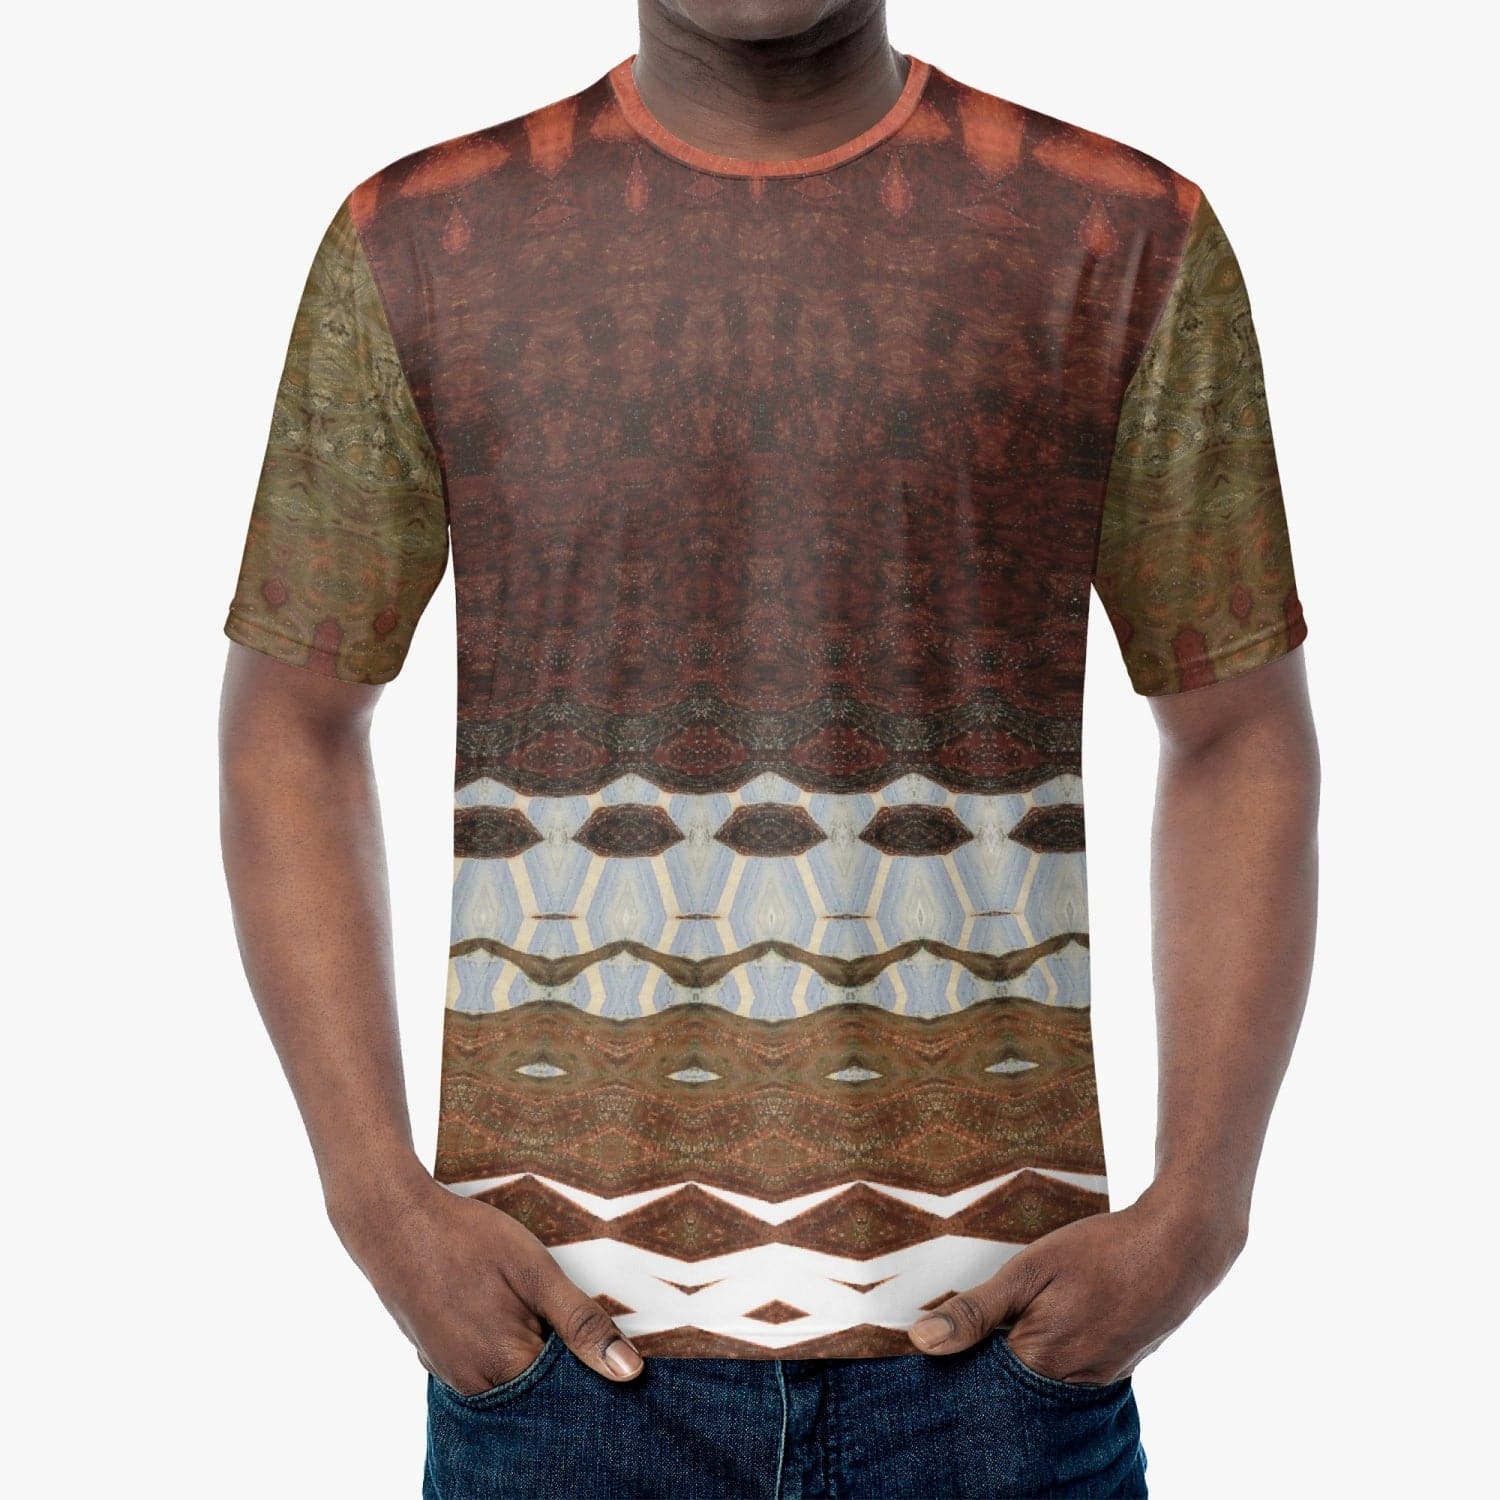 Sensus Studio Designed Handmade Brown T-shirt with Grey and White Elements